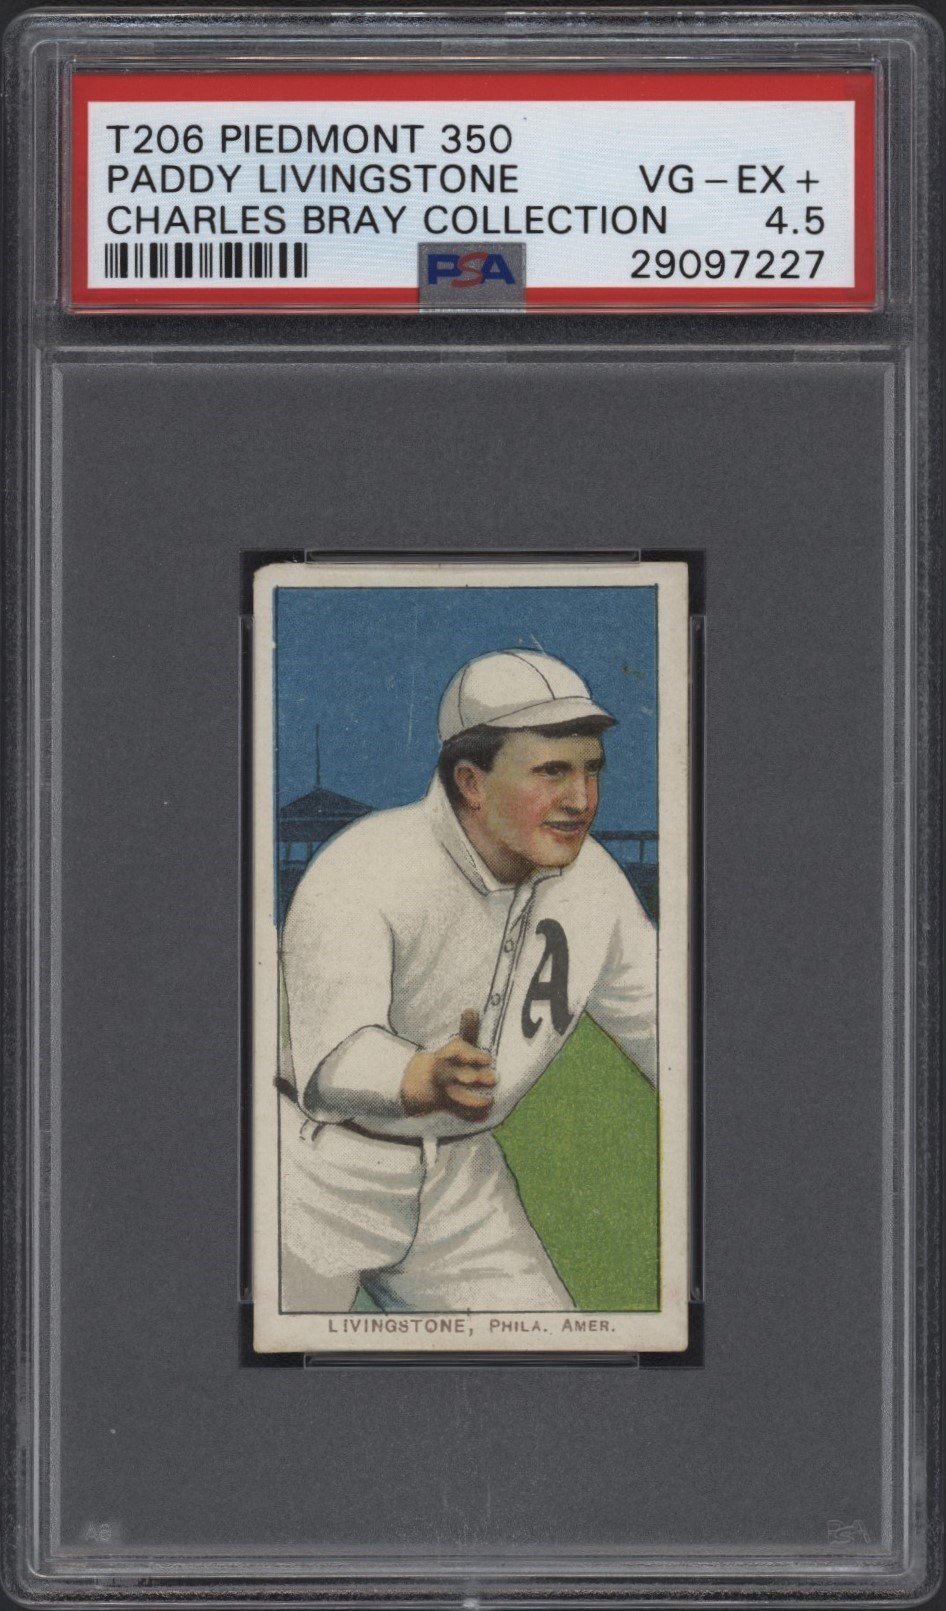 - T206 Piedmont 350 Paddy Livingstone PSA 4.5 From the Charles Bray Collection